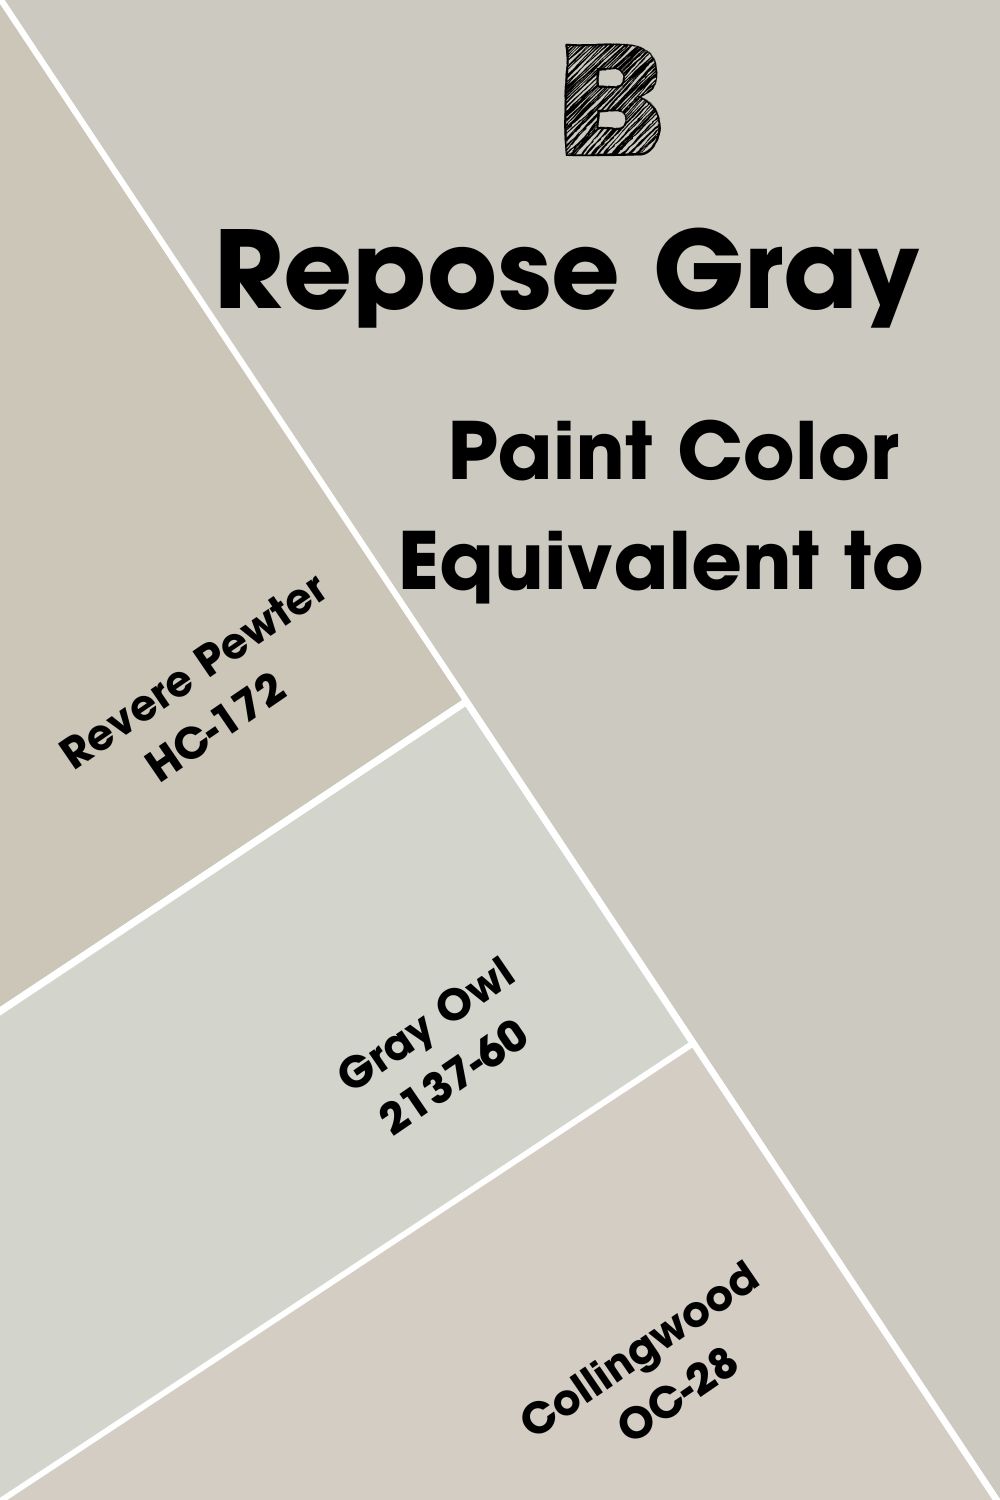 Paint Color Equivalent to